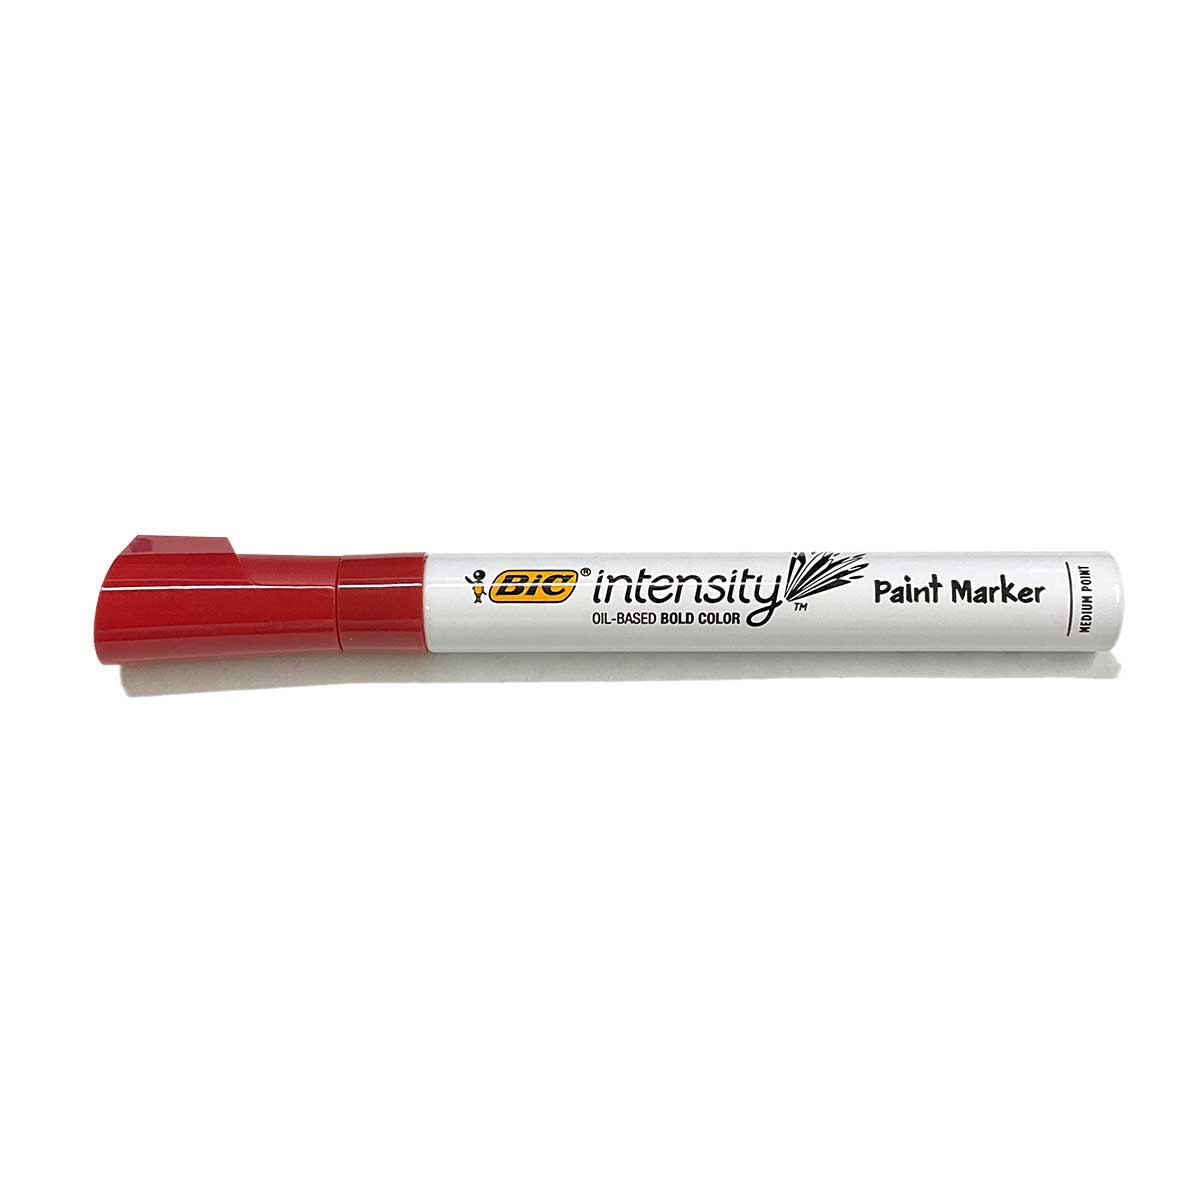 Red Paint Marker Bic Intensity Oil Based